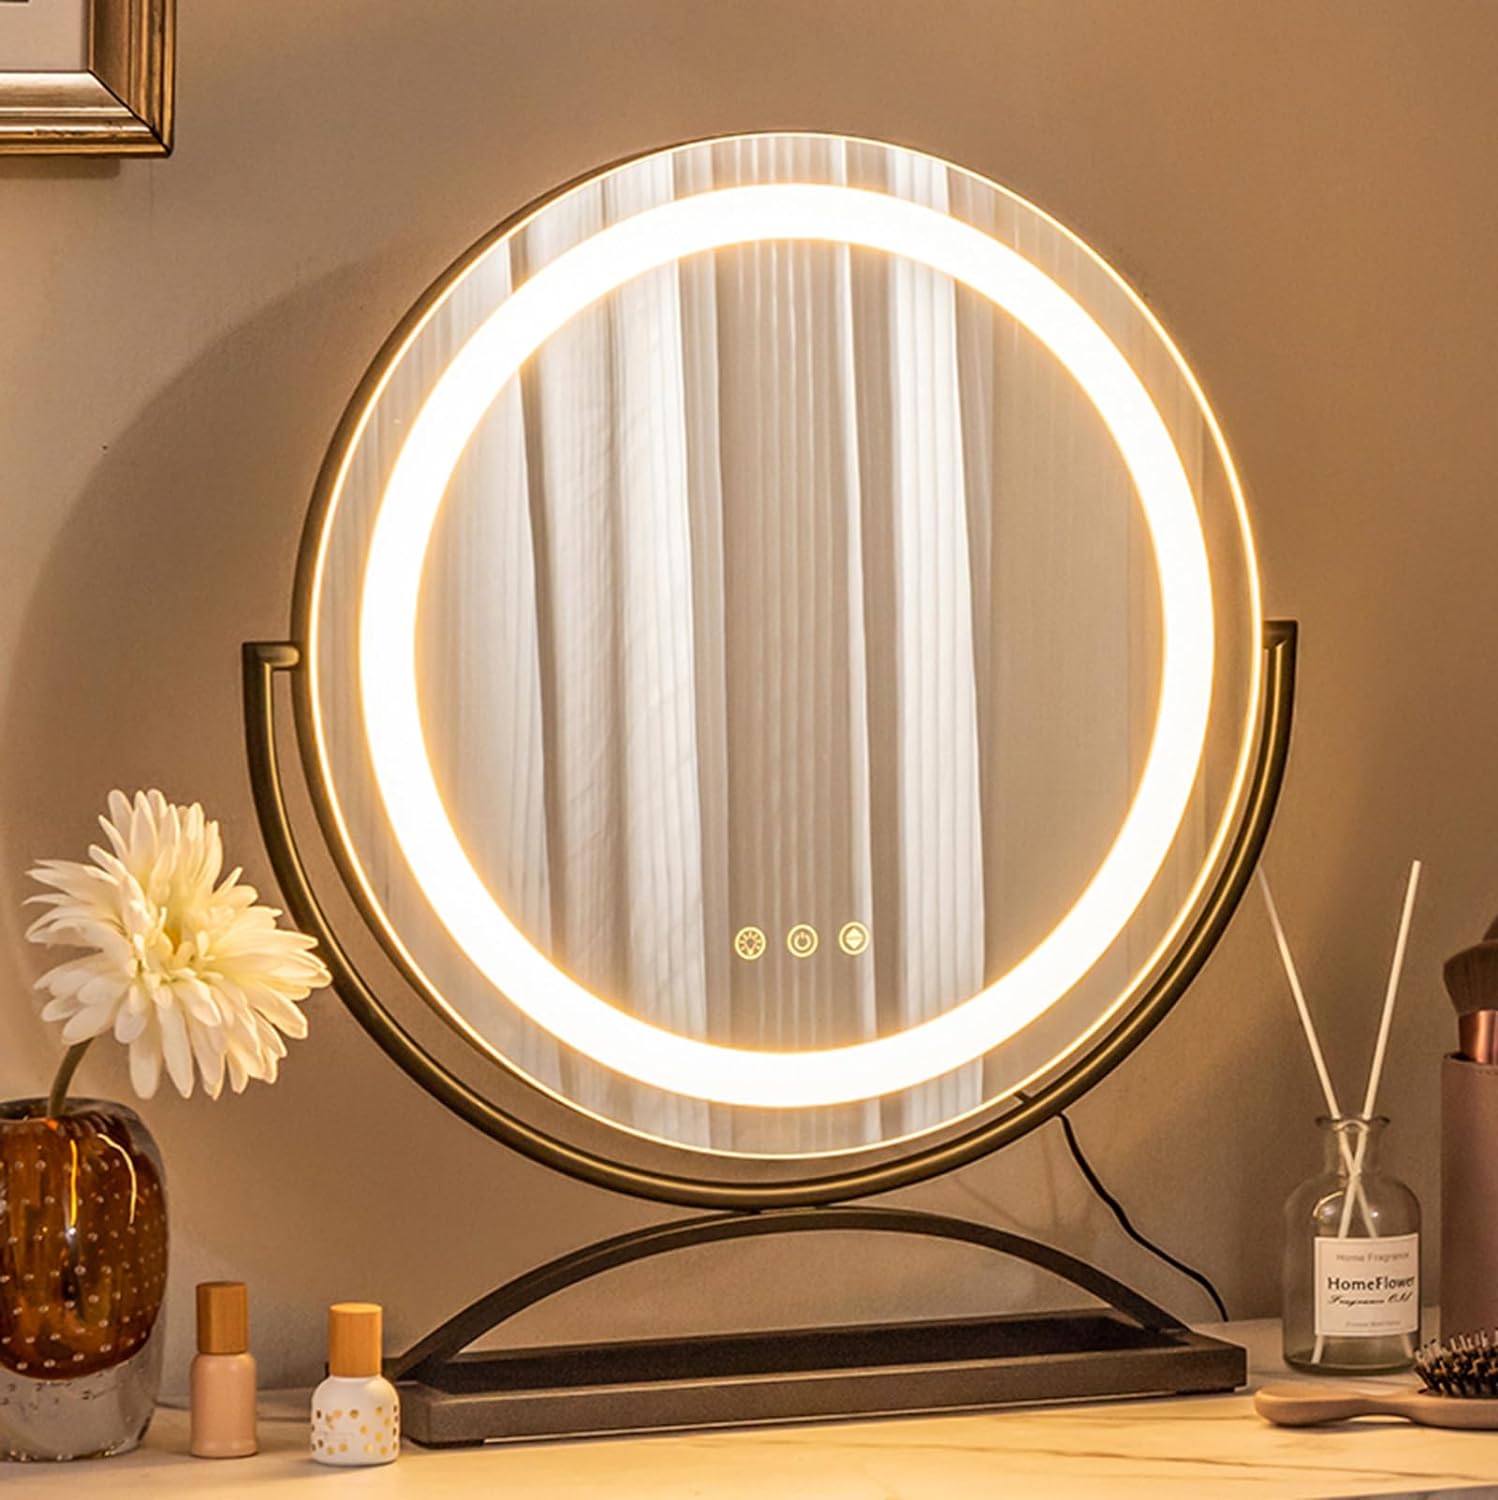 CHARMAID LED Makeup Mirror, 16 inch Lighted Vanity Mirror with Lights, 3 Color Lighting Modes